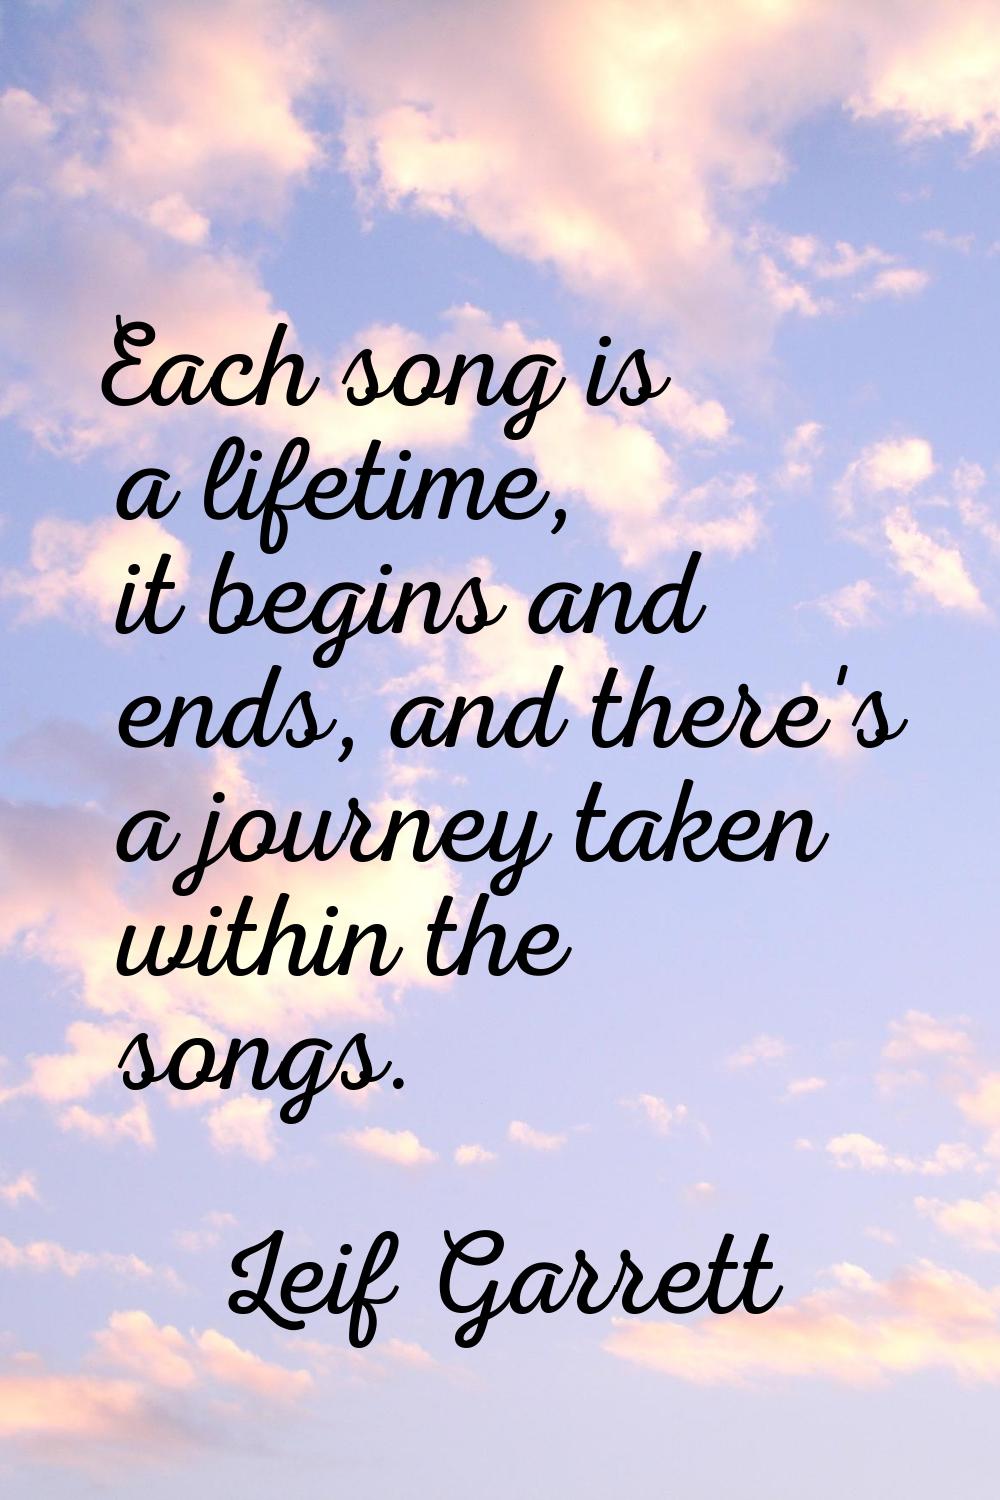 Each song is a lifetime, it begins and ends, and there's a journey taken within the songs.